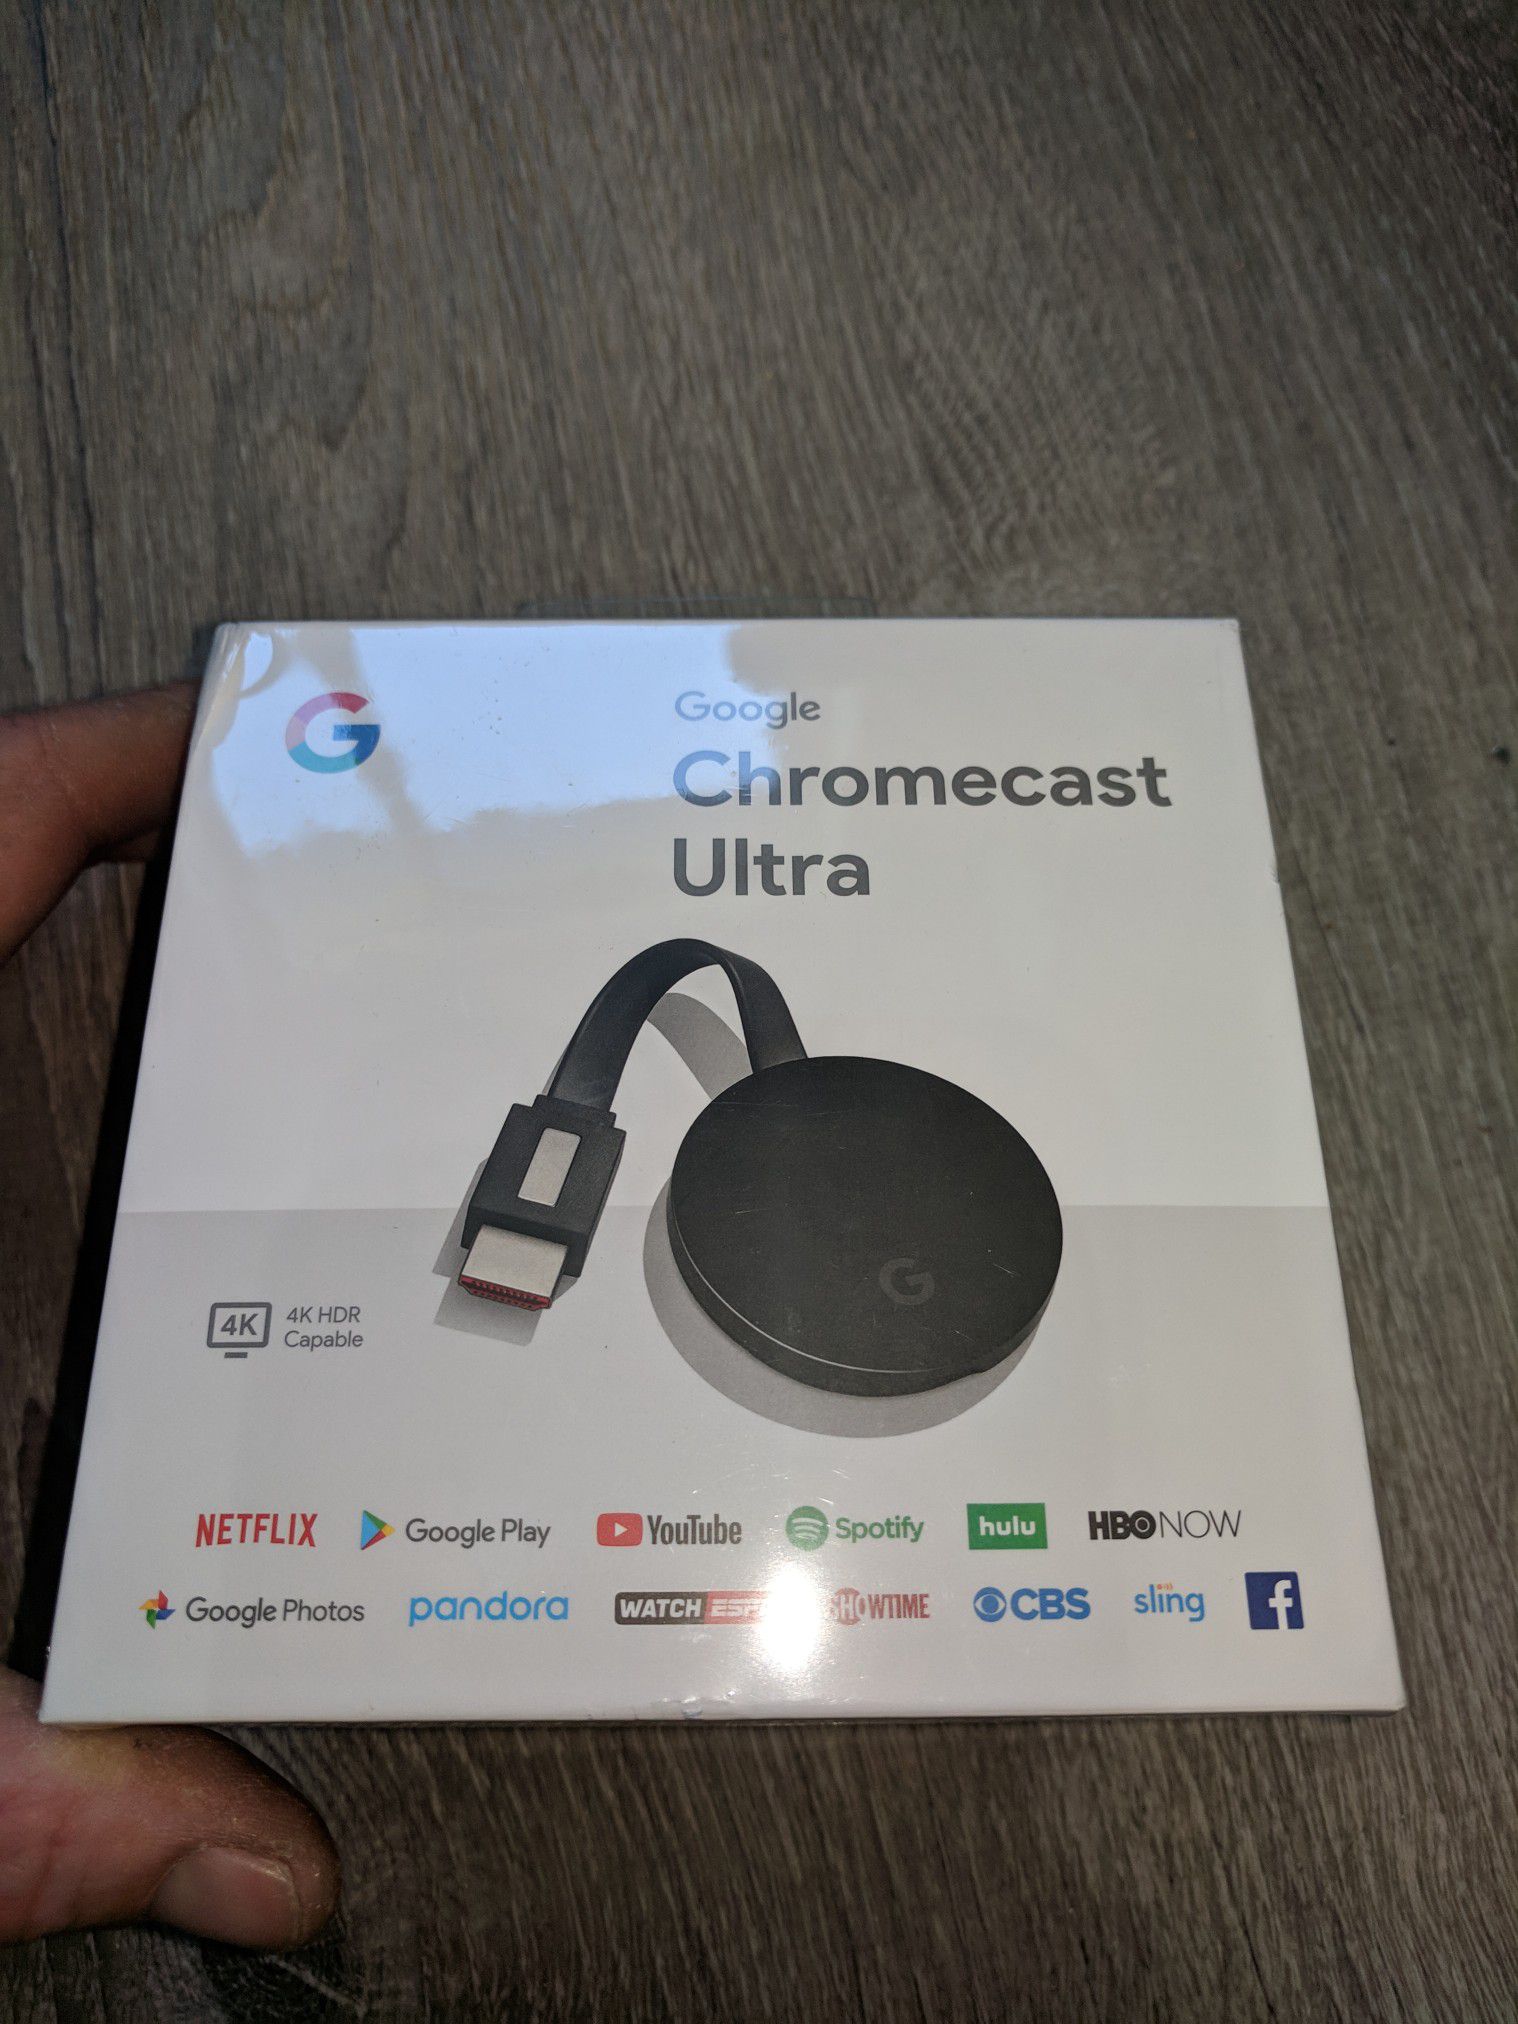 Chrome Cast Ultra Hulu HBOnow Showtime Netflix and way more